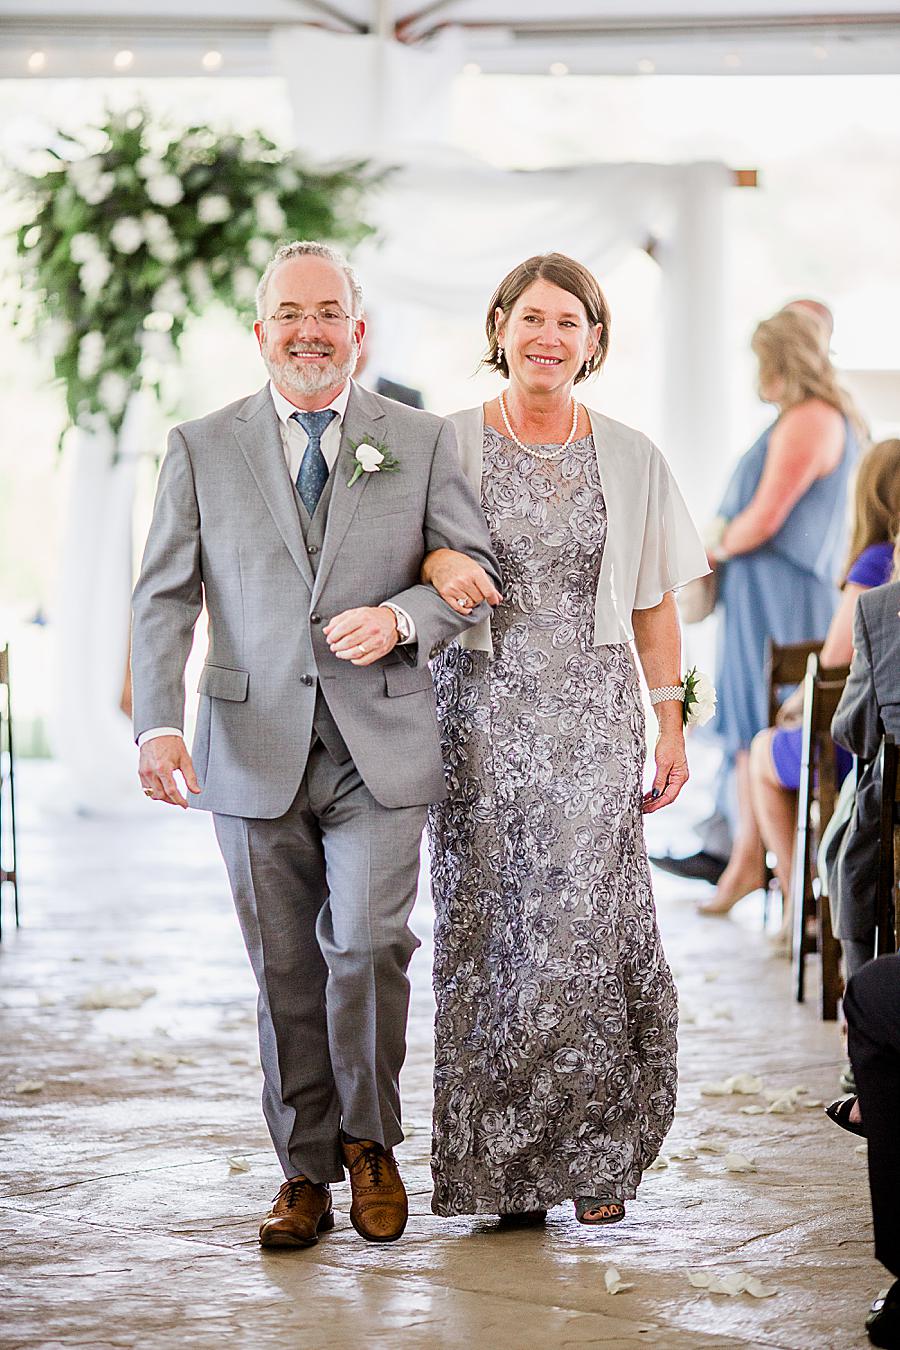 Gray outfits at this Marblegate Farm Wedding by Knoxville Wedding Photographer, Amanda May Photos.